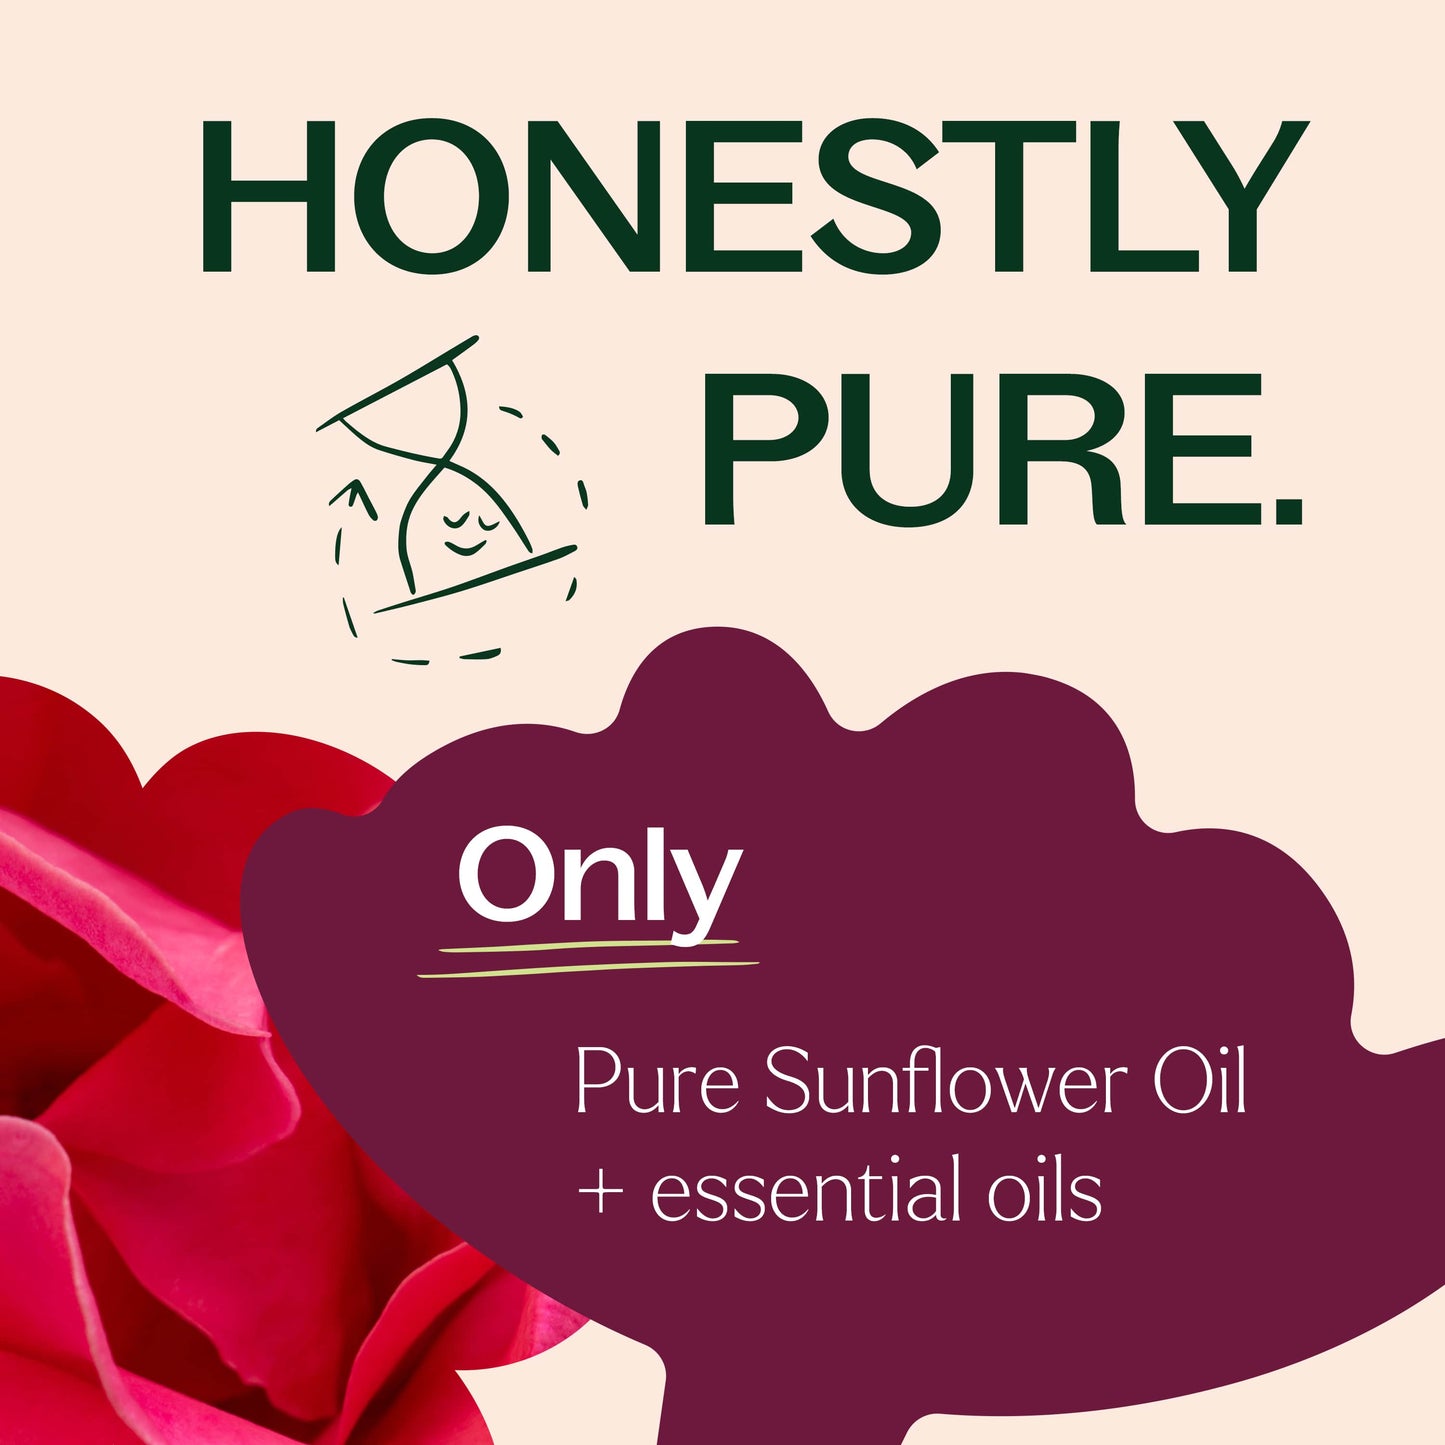 Anti Age Body Oil is honestly pure. Only sunflower oil and essential oils.